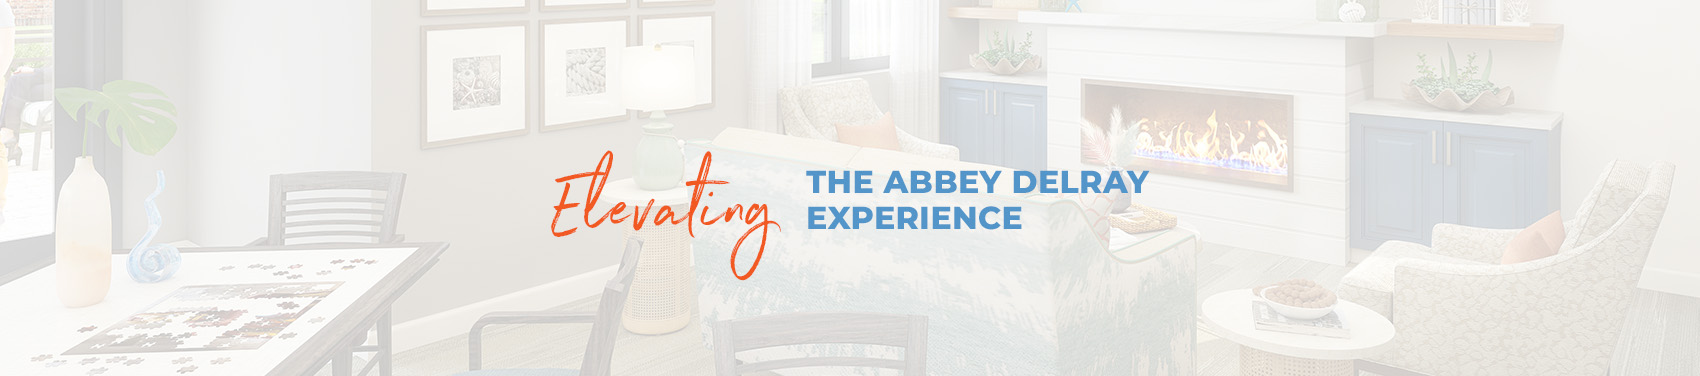 Independent Living Newly Remodeled Delray Beach FL Abbey Delray